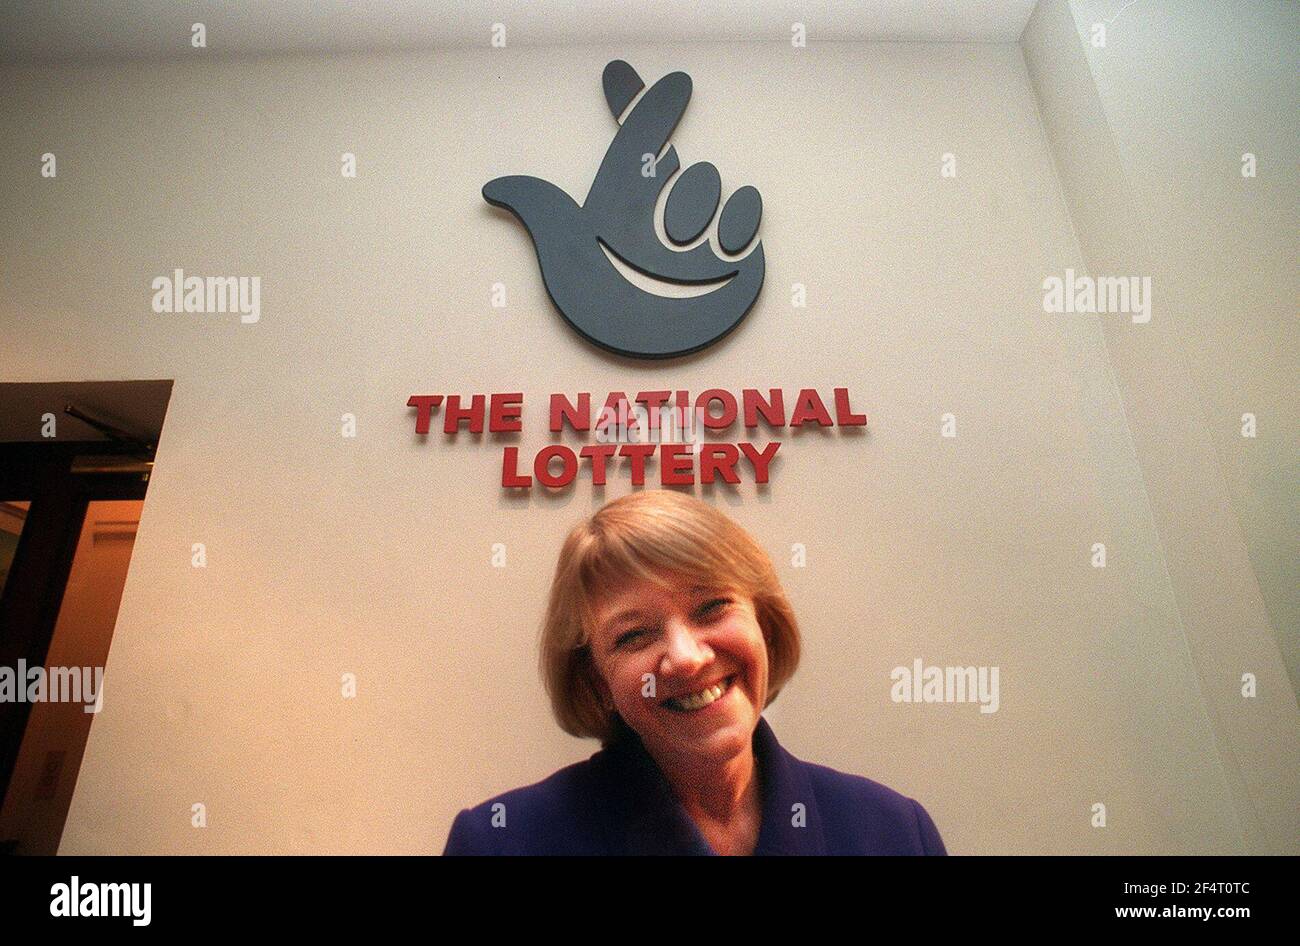 DIANNE THOMPSON, CHIEF EXECUTIVE OF CAMELOT, DEC 2000IN THE FOYER OF HER OFFICE AFTER HEARING THAT CAMELOT HAS BEEN CHOSEN TO CONTINUE RUNNING THE NATIONAL LOTTERY. 19.12,00     PIC:JOHN VOOS Stock Photo